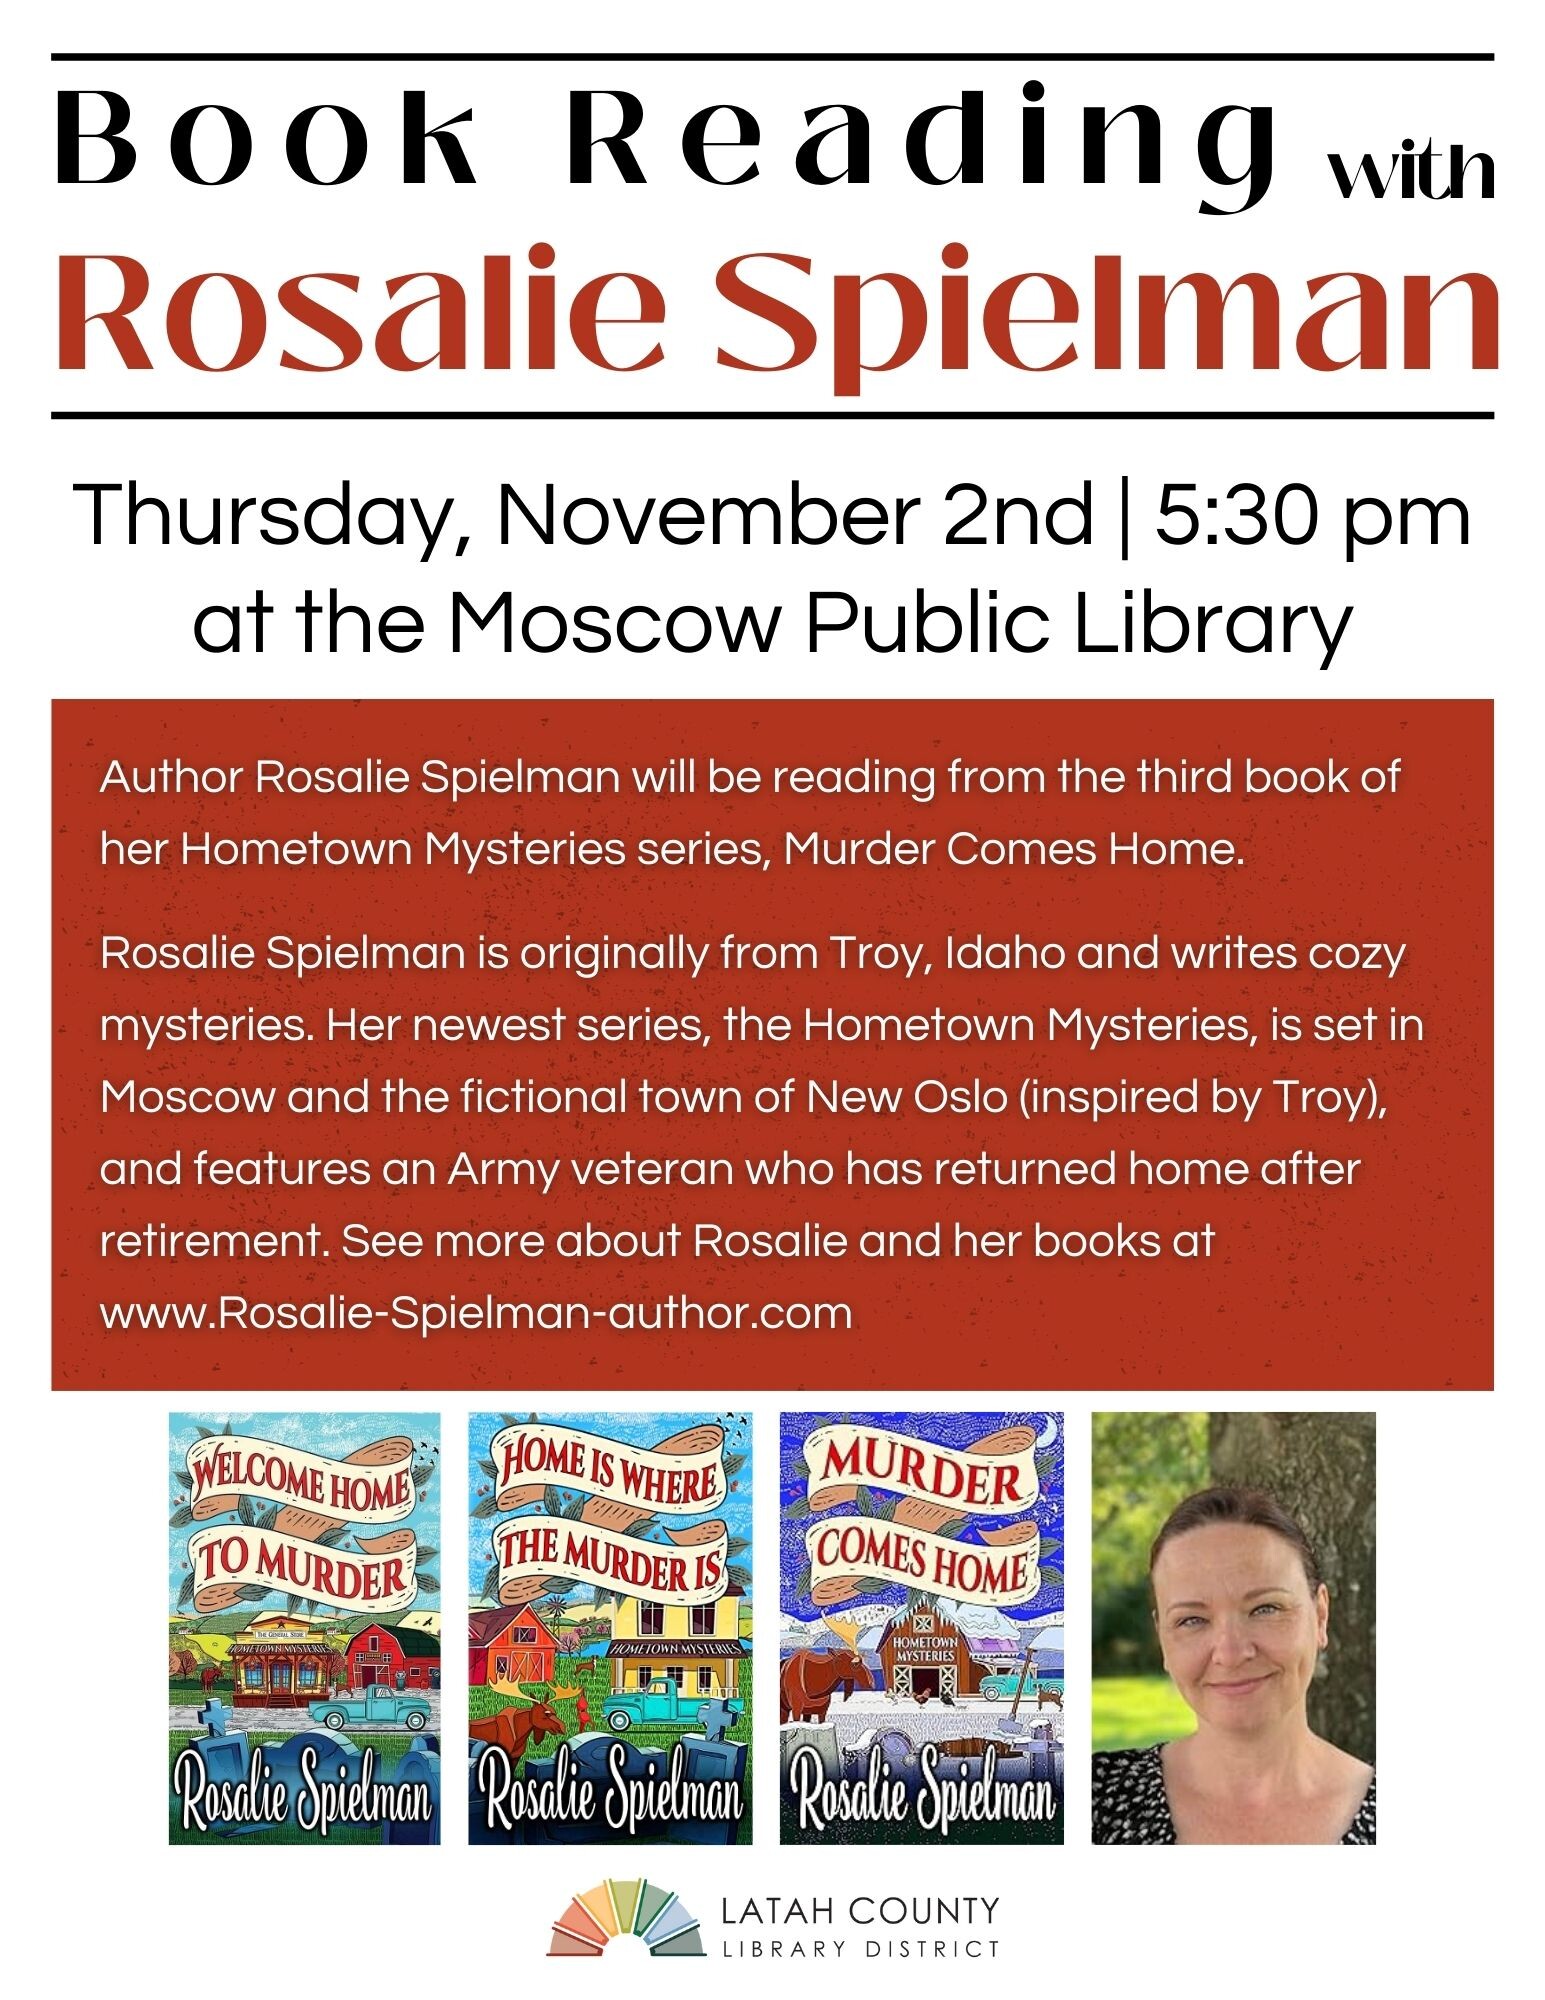 Book Reading with Rosalie Spielman at Moscow Public Library